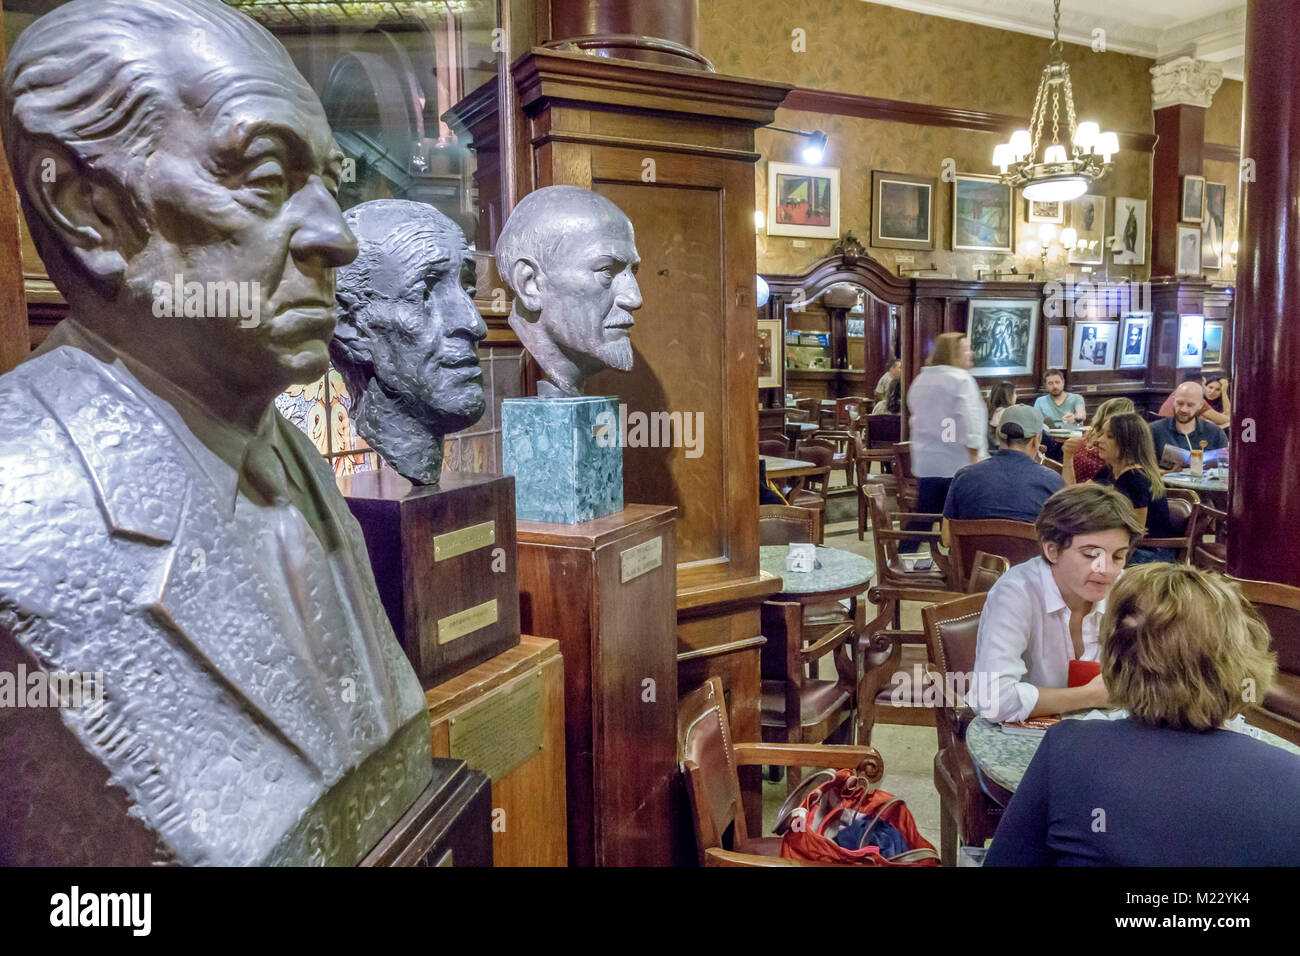 Buenos Aires Argentina,Cafe Tortoni,landmark,iconic coffeehouse,restaurant restaurants food dining cafe cafes,interior inside,tables,decor,statue,bust Stock Photo